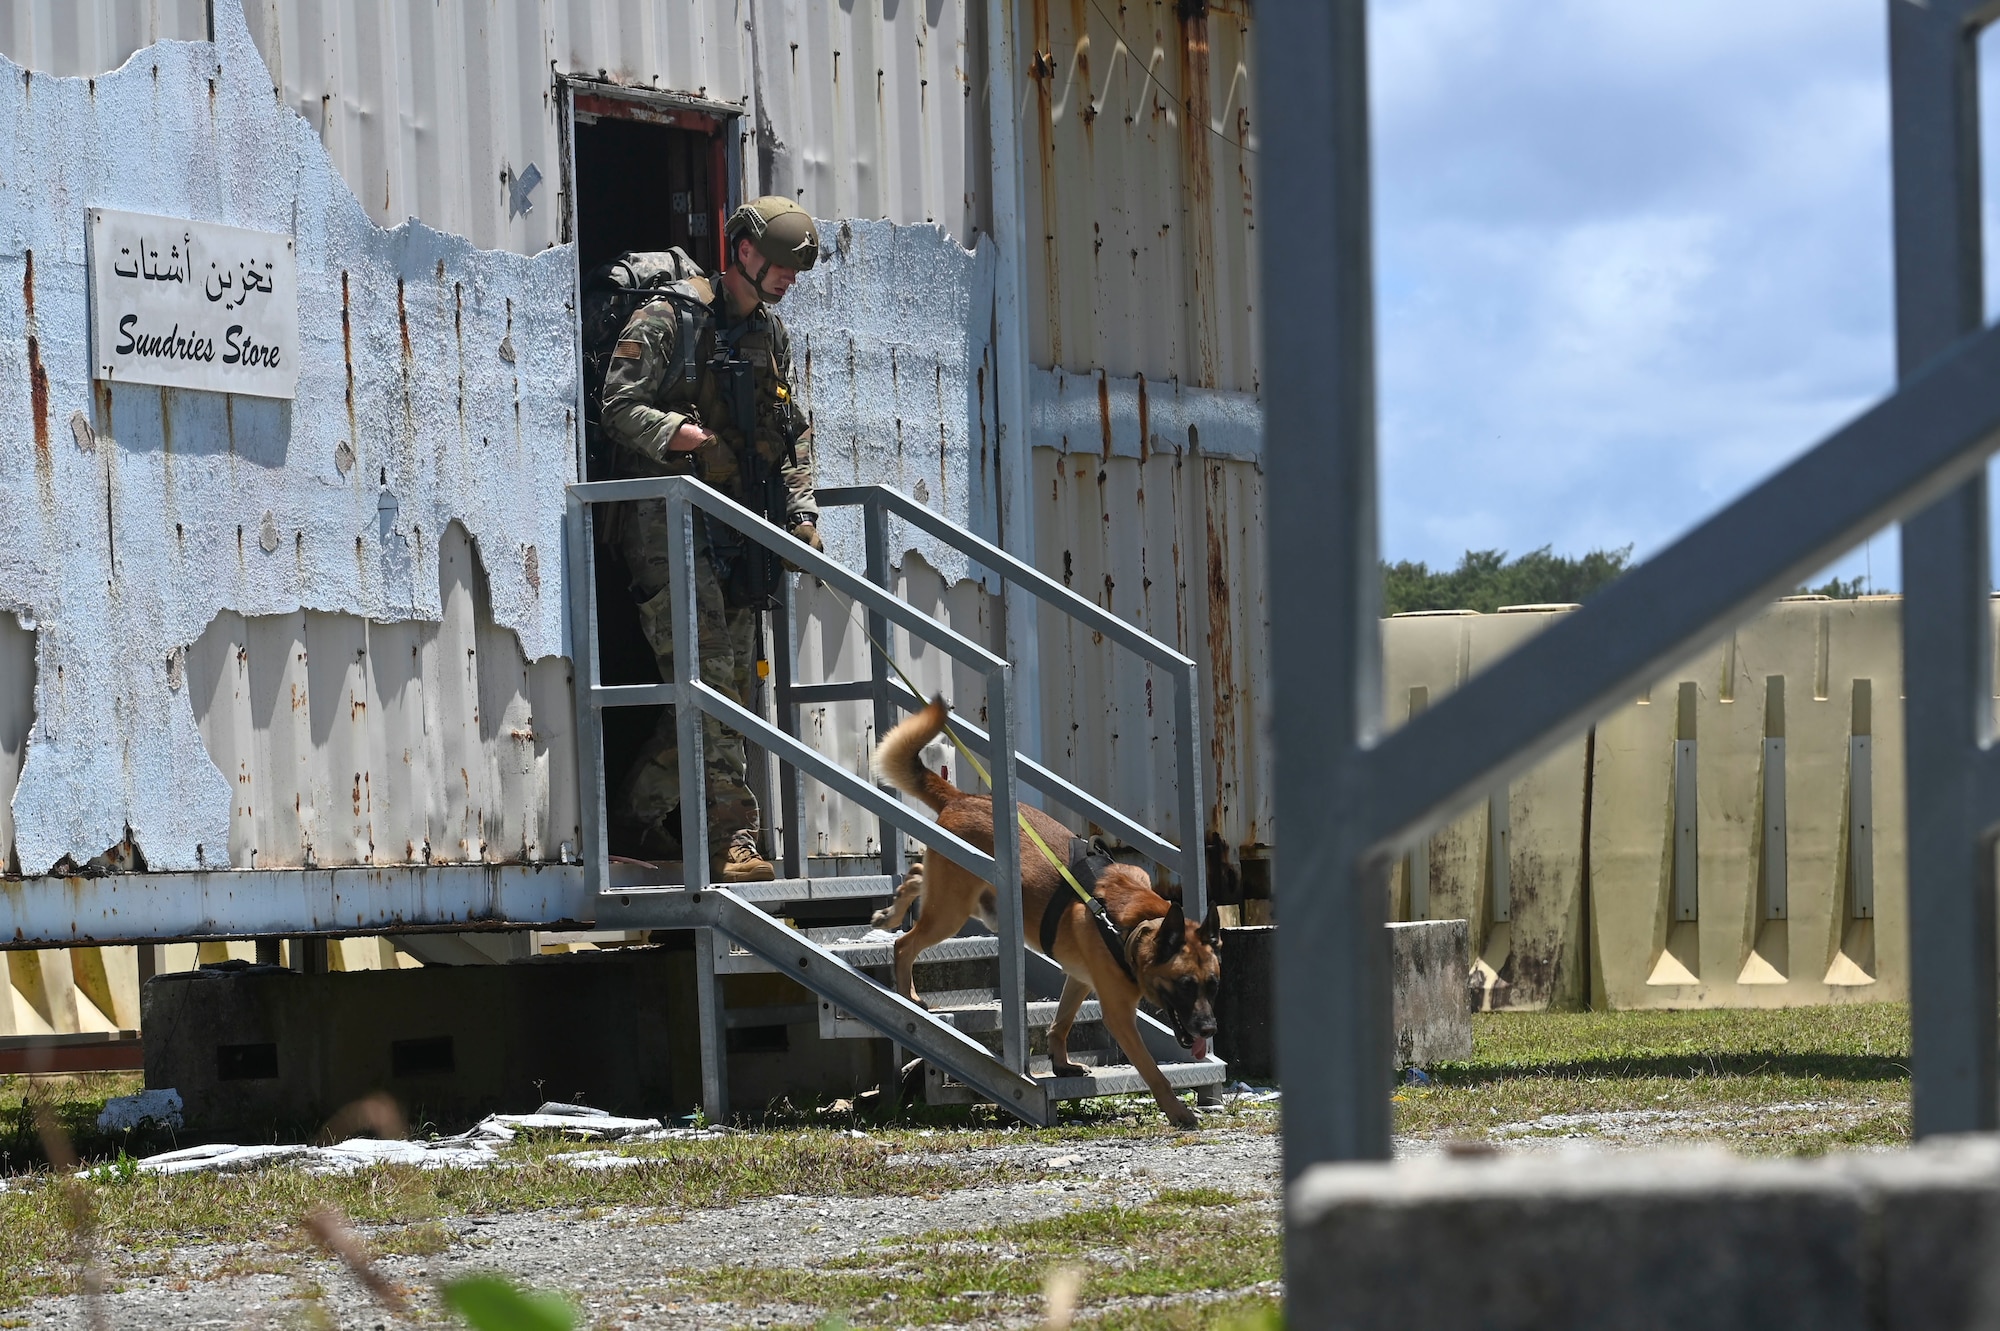 U.S. Air Force Staff Sgt. Tyler Parrish, military working dog handler assigned to the 647th Security Forces Squadron, Joint Base Pearl Harbor-Hickam, Hawaii, and his MWD, Joker, participate in the MWD challenge during the Advanced Combat Skills Assessment at Andersen Air Force Base, Guam, April 17, 2022. ACSA bolsters defender ethos, strengthens esprit-de-corps amongst participants and reinforces the competitive nature within security forces. (U.S. Air Force photo by Airman 1st Class Emily Saxton)